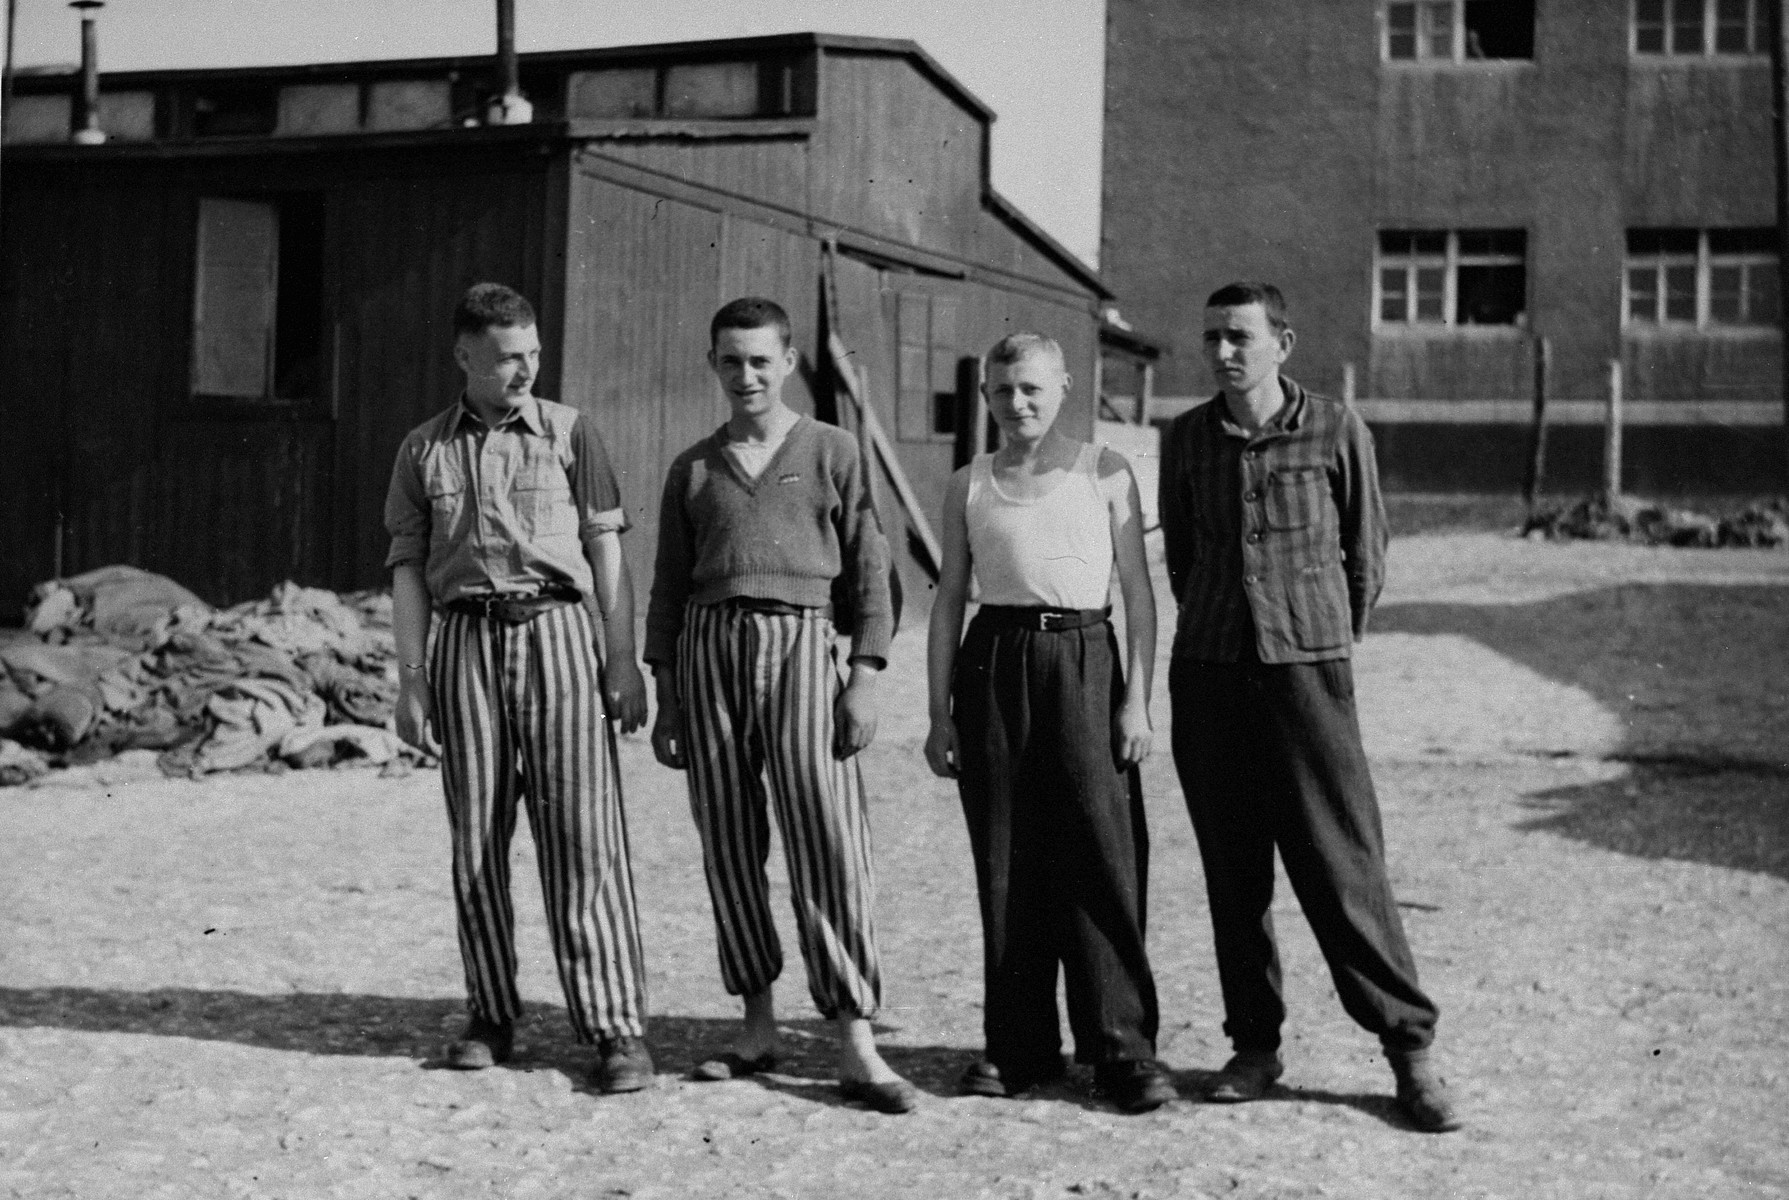 Portrait of four young survivors in Buchenwald concentration camp.